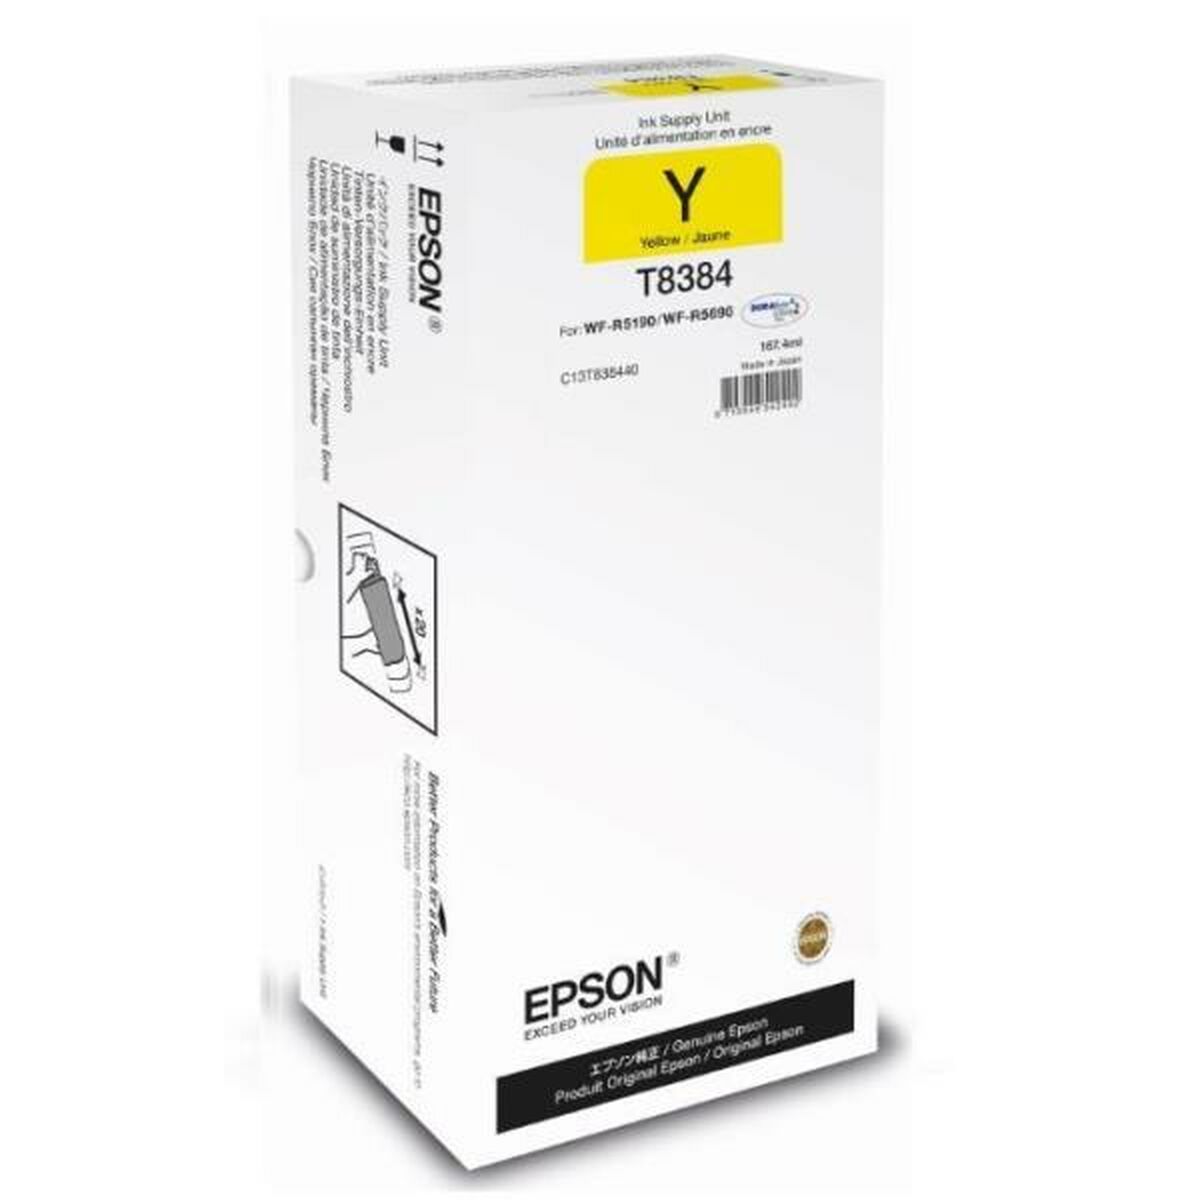 Compatible Ink Cartridge Epson C13T838440 Yellow Black, Epson, Computing, Printers and accessories, compatible-ink-cartridge-epson-c13t838440-yellow-black, Brand_Epson, category-reference-2609, category-reference-2642, category-reference-2874, category-reference-t-19685, category-reference-t-19911, category-reference-t-21377, category-reference-t-25688, Condition_NEW, office, Price_200 - 300, Teleworking, RiotNook